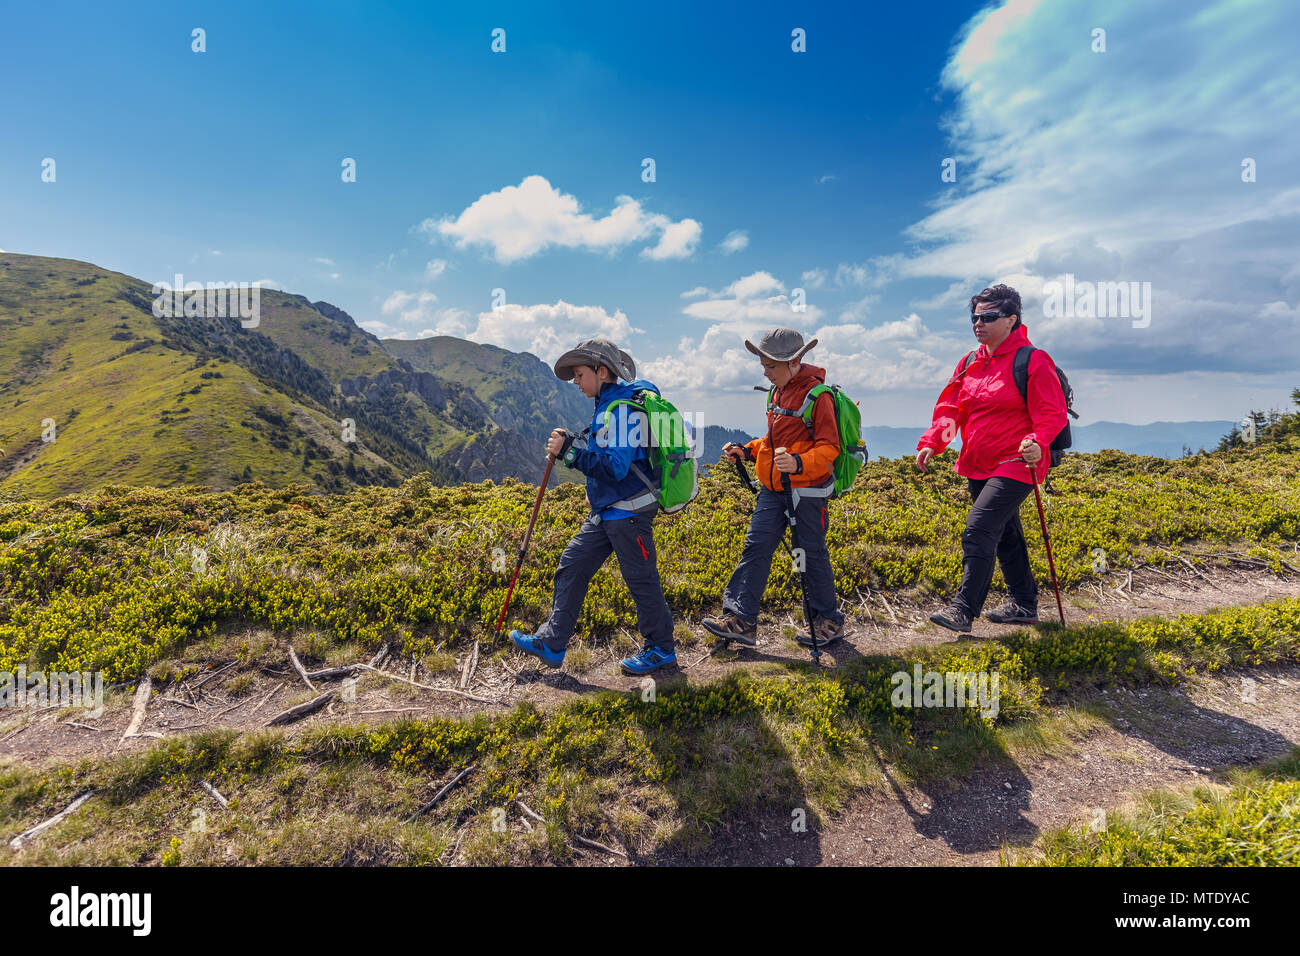 Woman with her children hiking in Romanian mountains, recreation activity Stock Photo